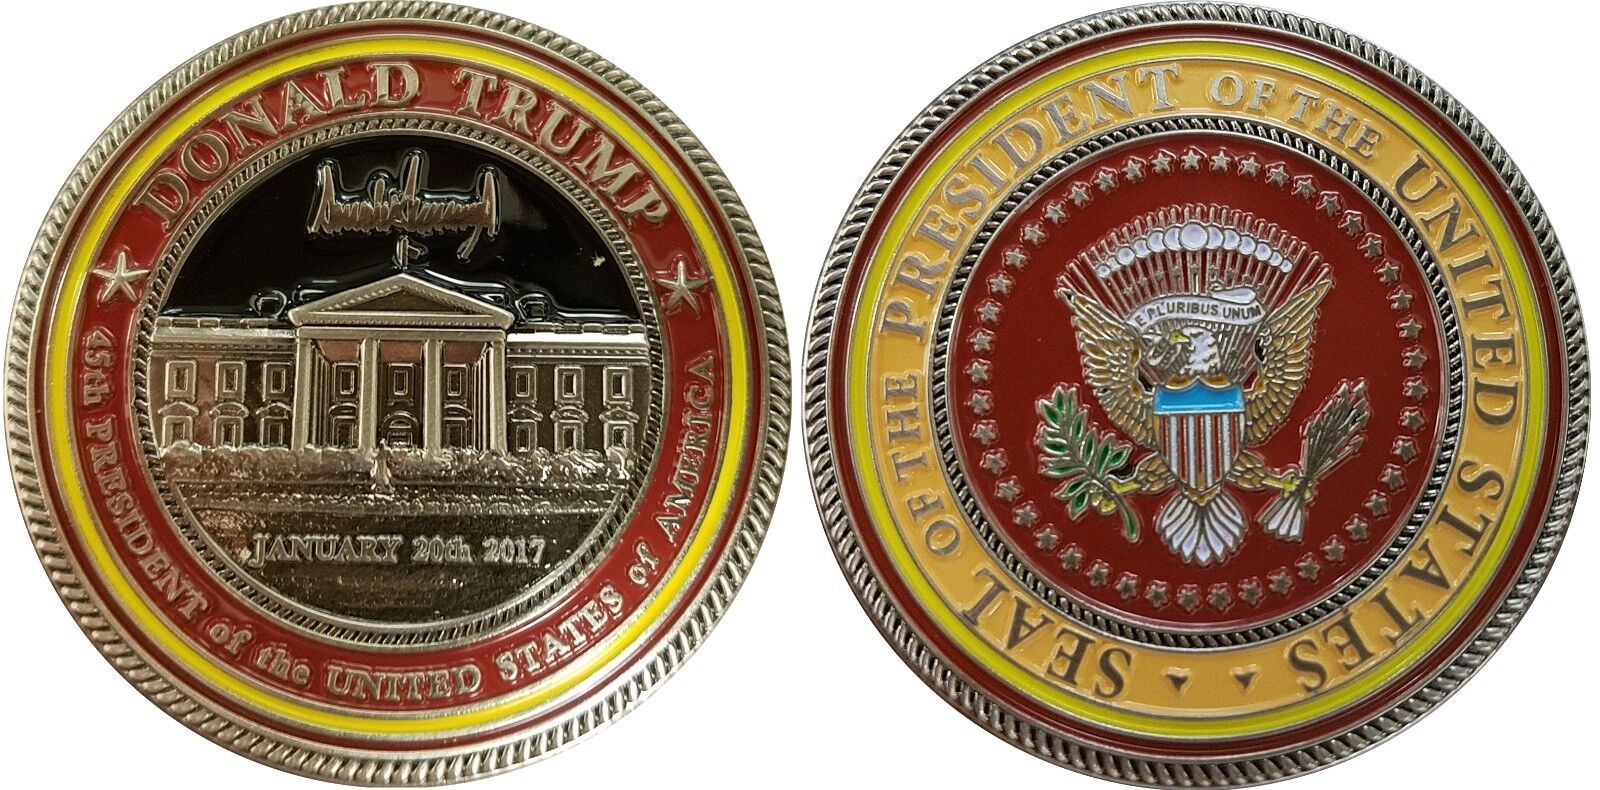 President Donald J Trump Inauguration Challenge Coin Jan 20th 2017 a  63